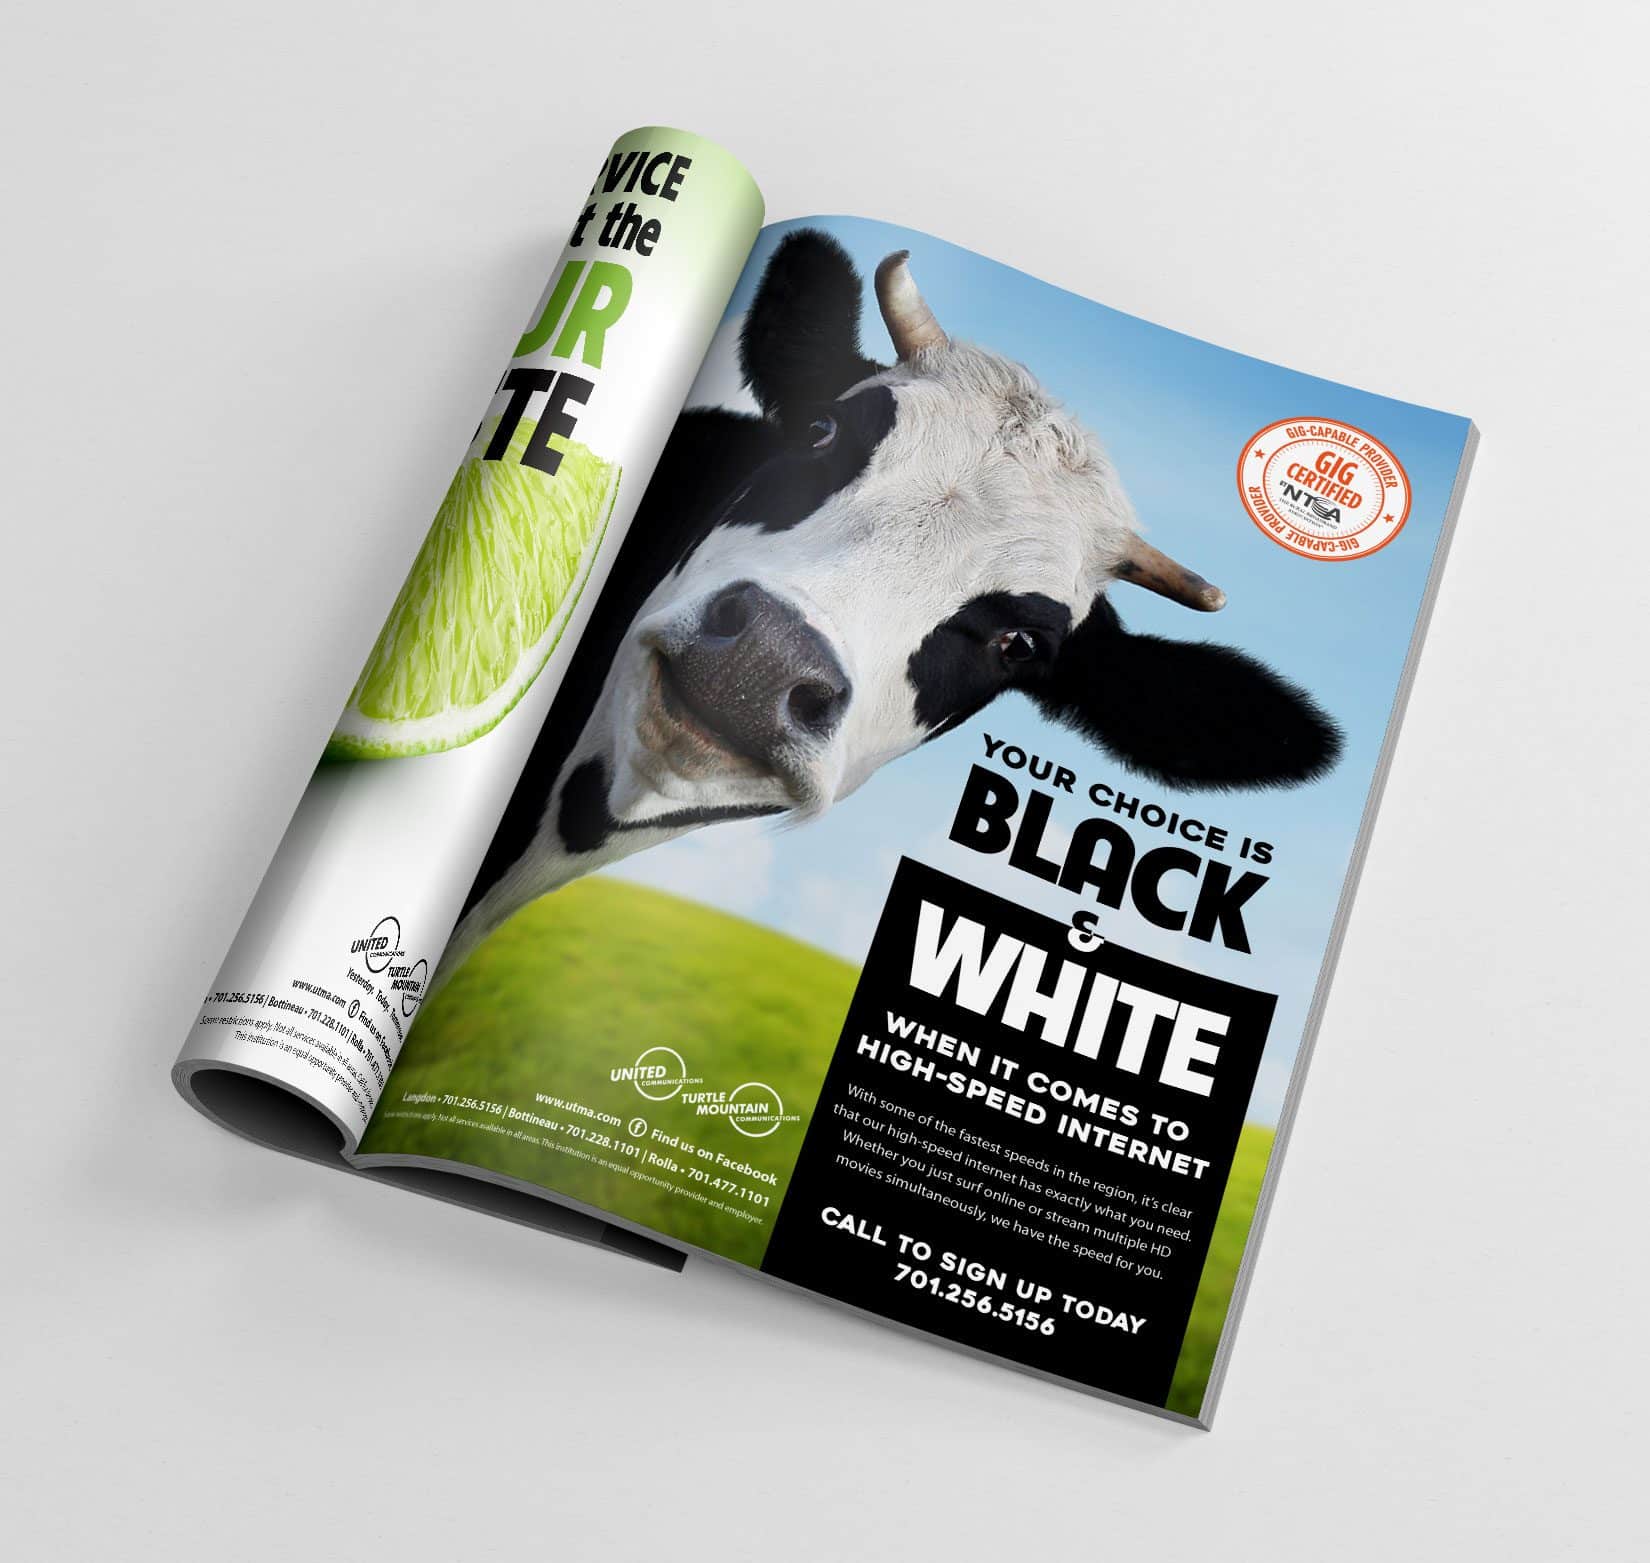 A full-page color print ad for United Communications in a magazine on a white background